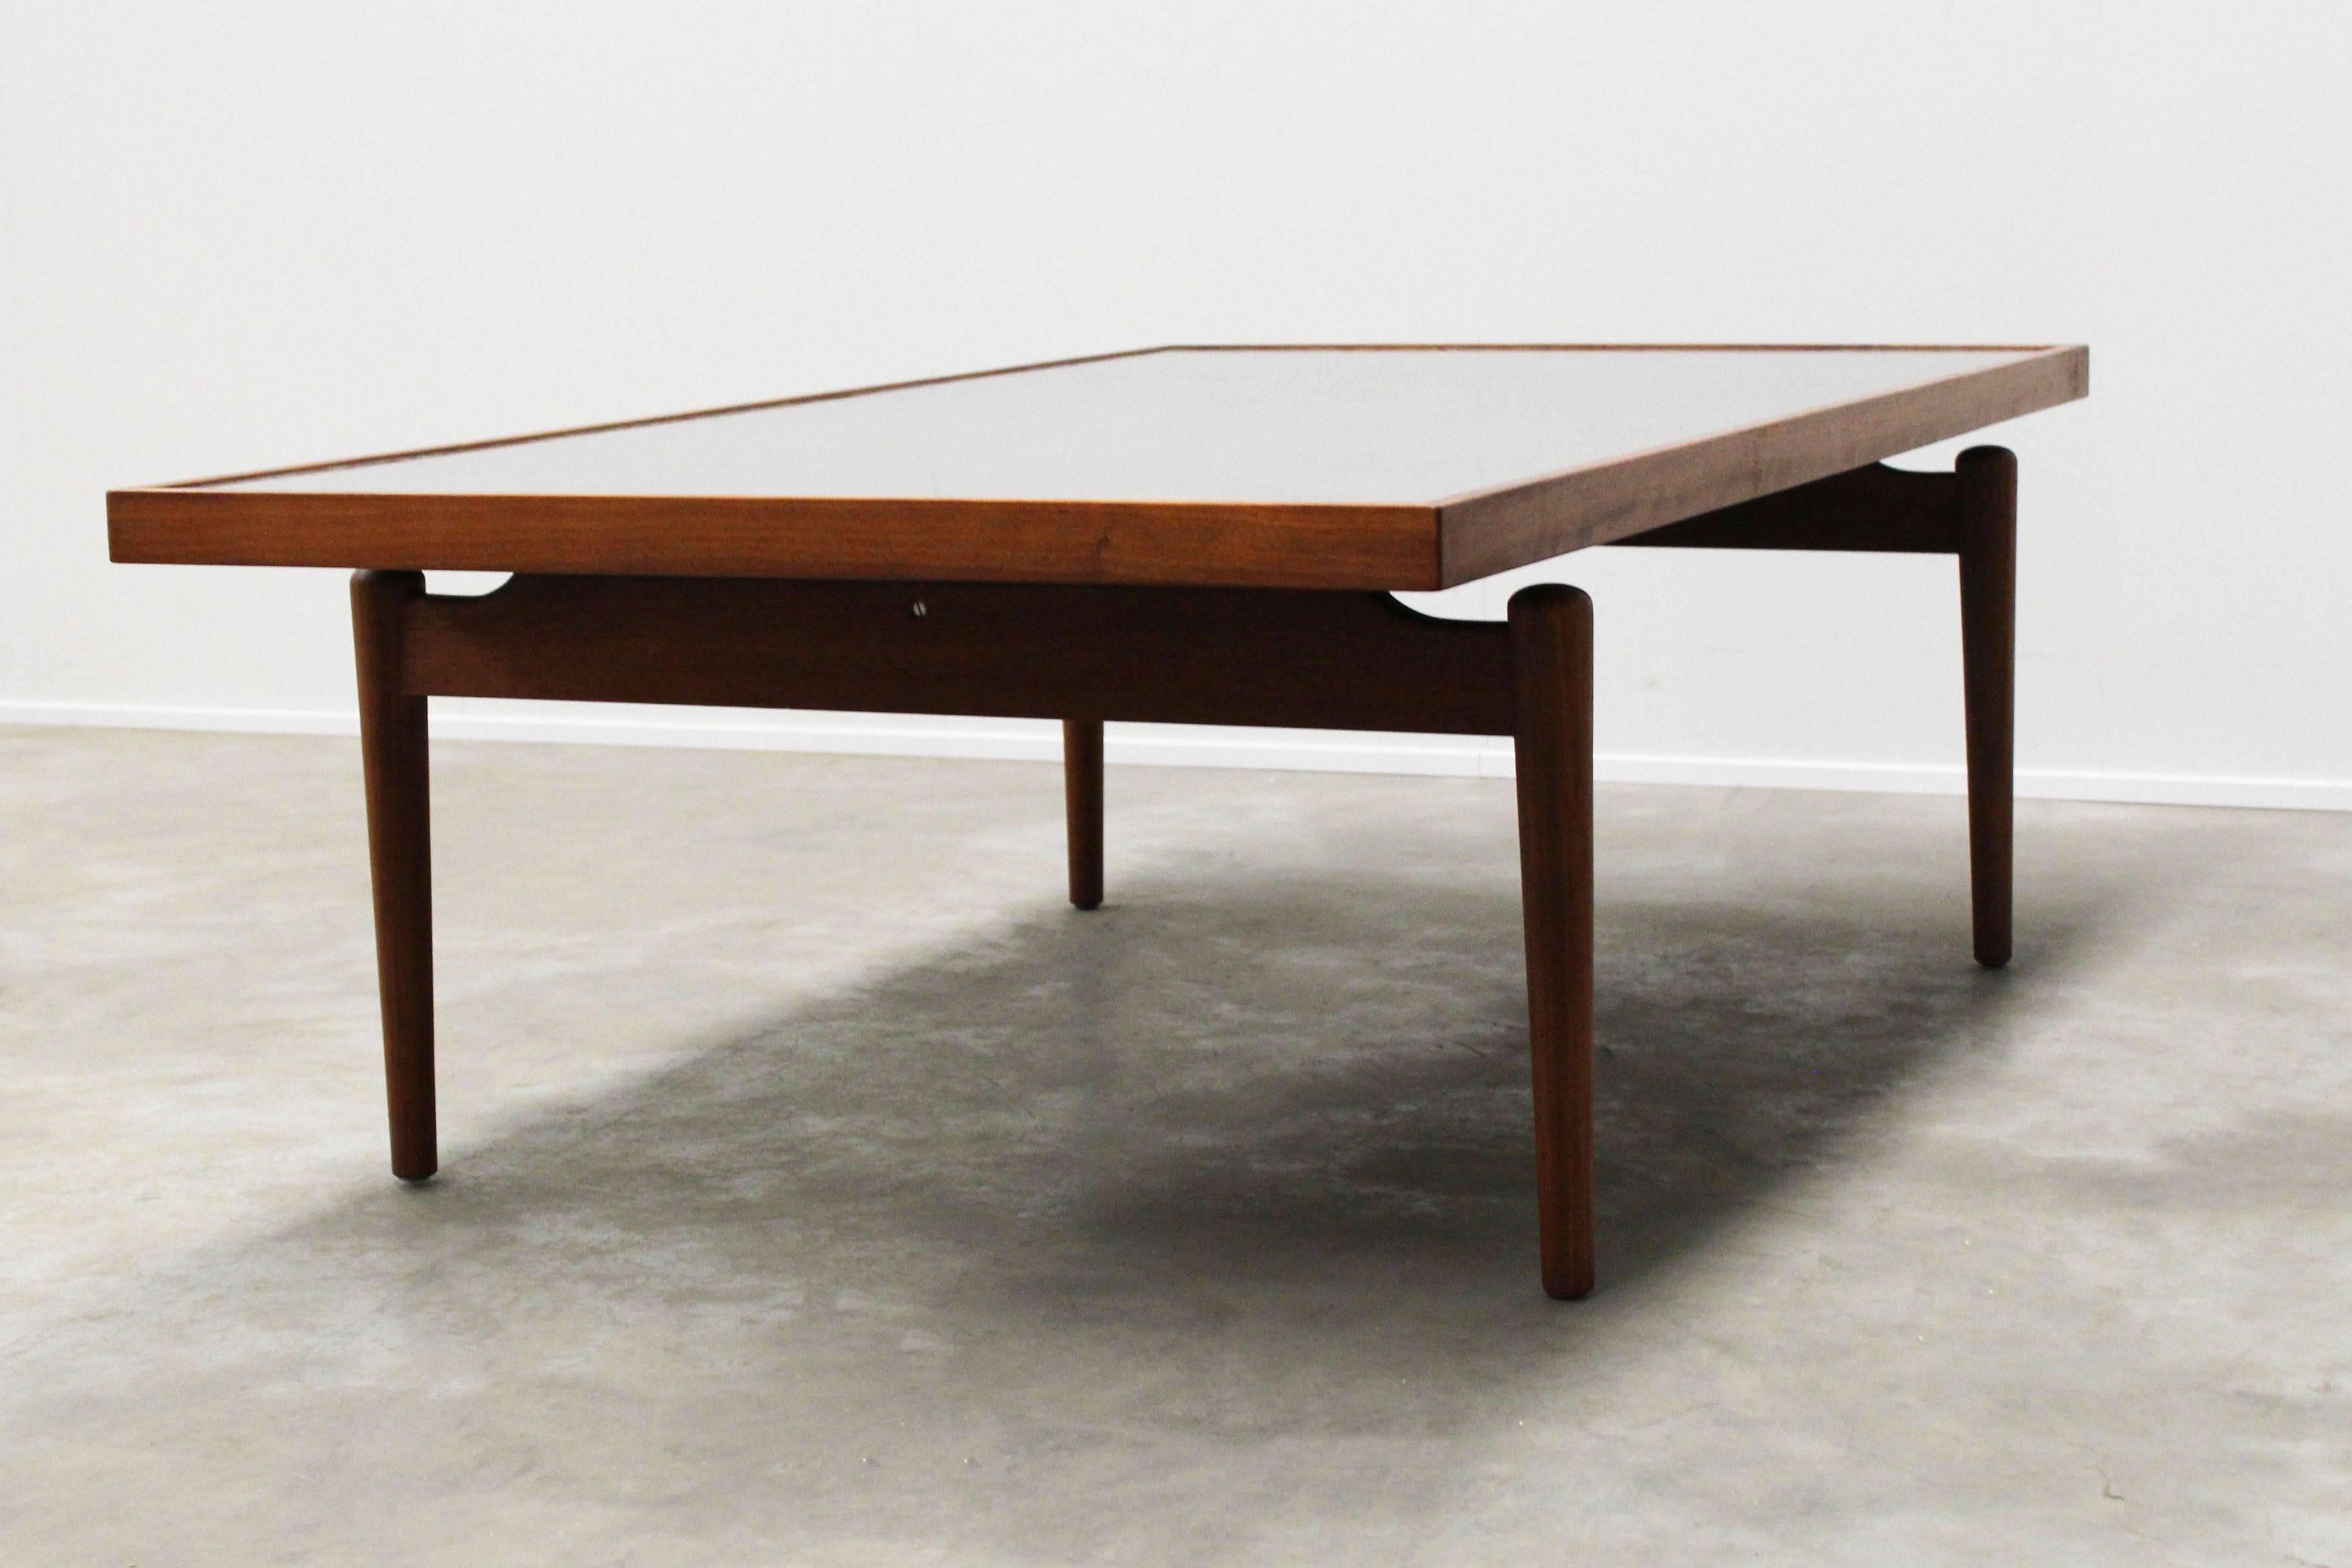 German Midcentury Large Sculpted Metal and Teak Coffee Table by Heinz Lilienthal, 1970 For Sale